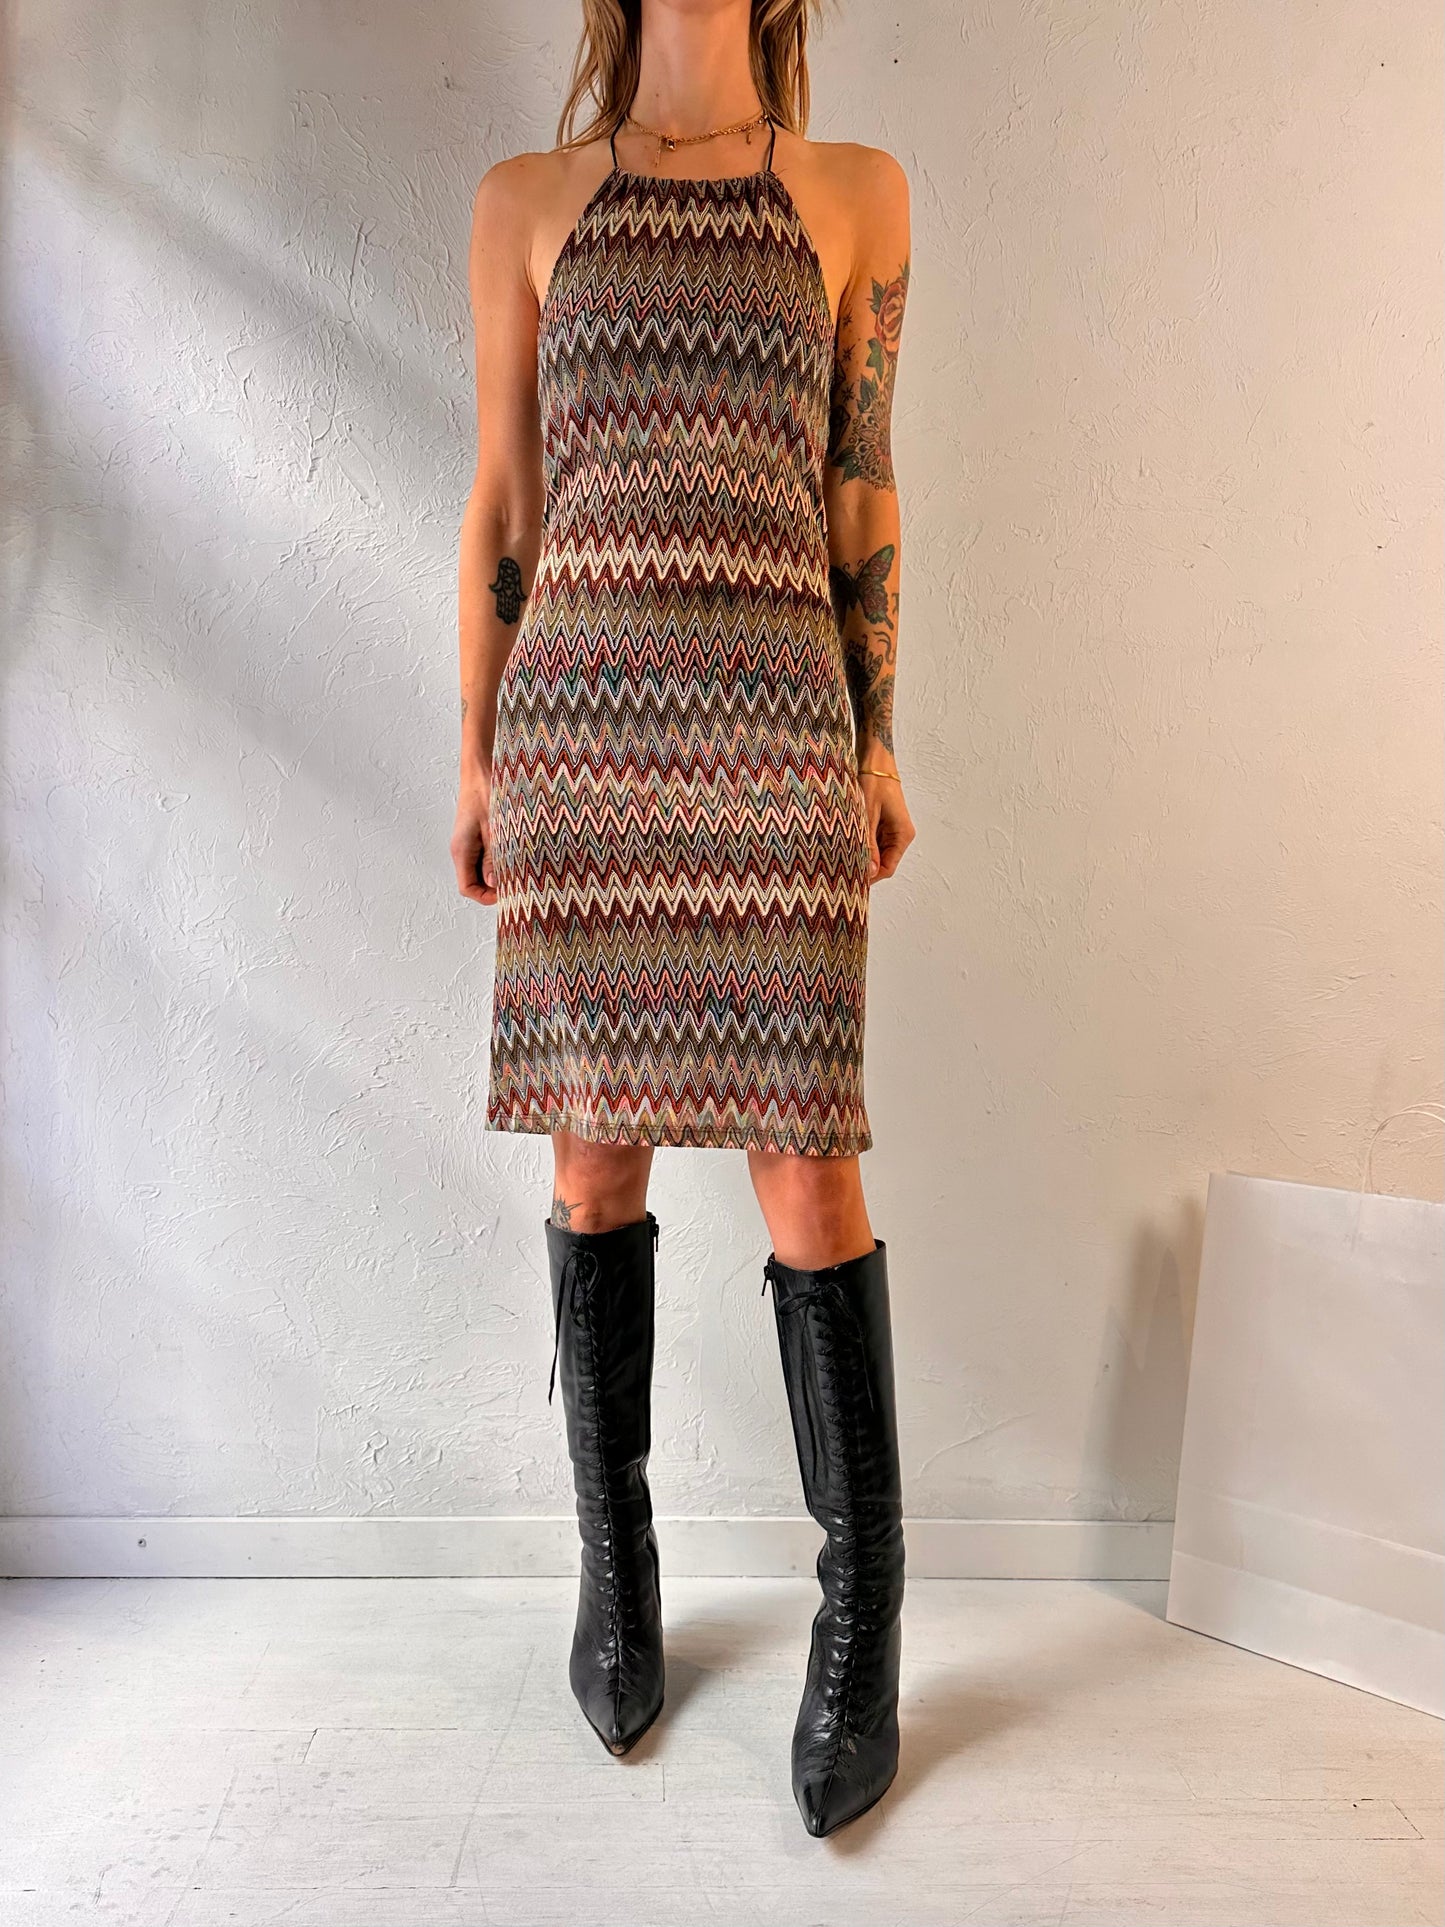 90s 'Le Chateau' Halter Dress / Small